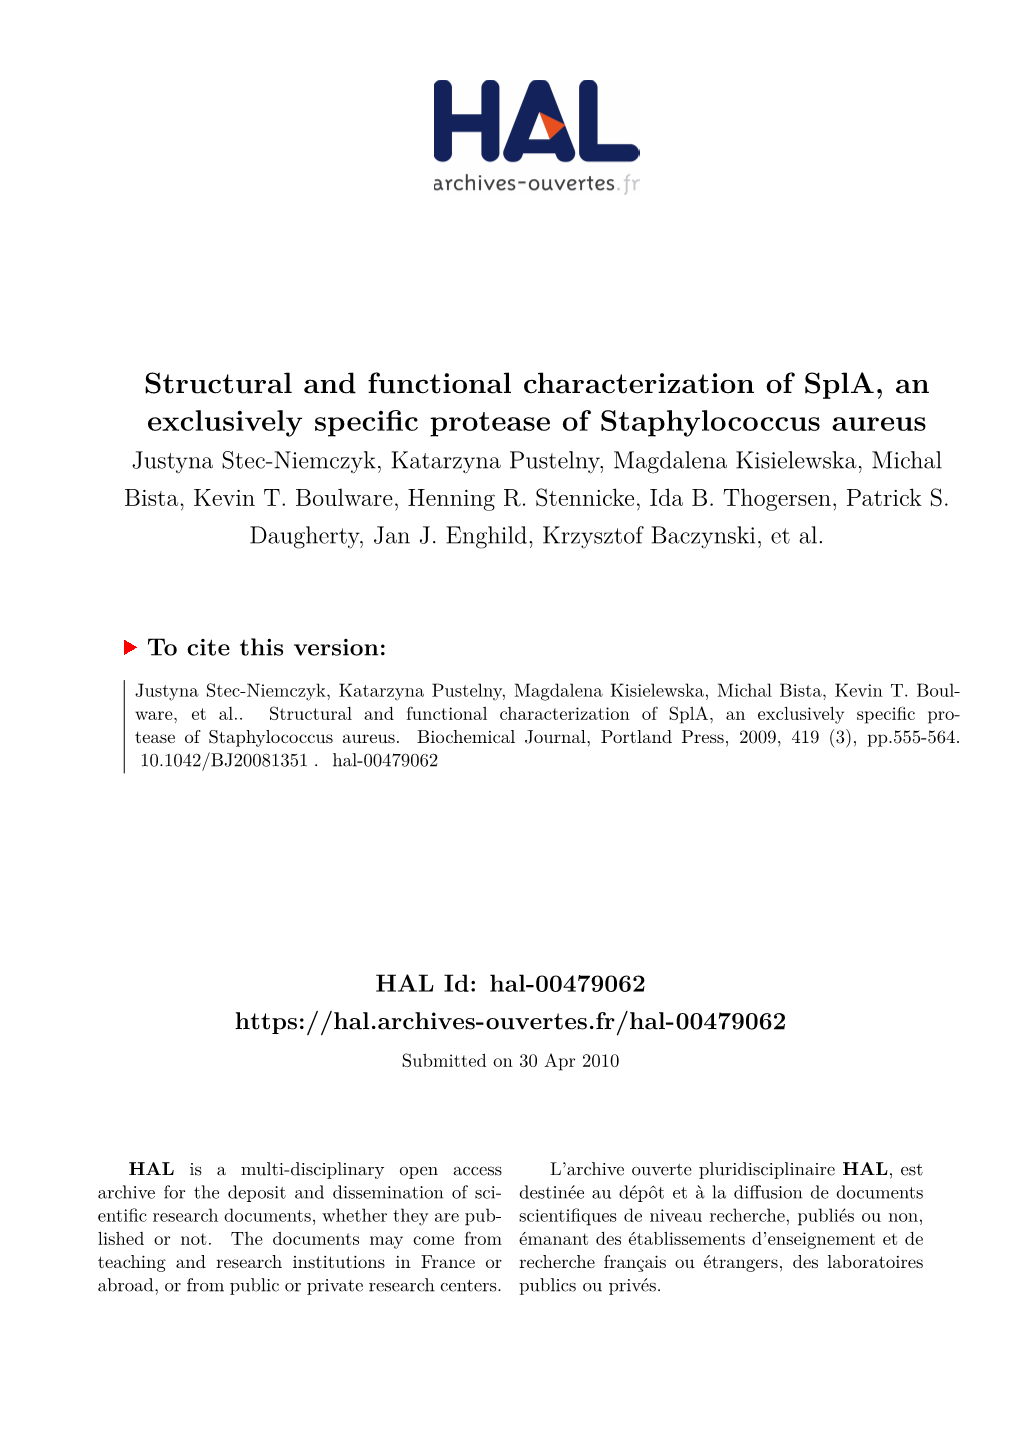 Structural and Functional Characterization of Spla, An